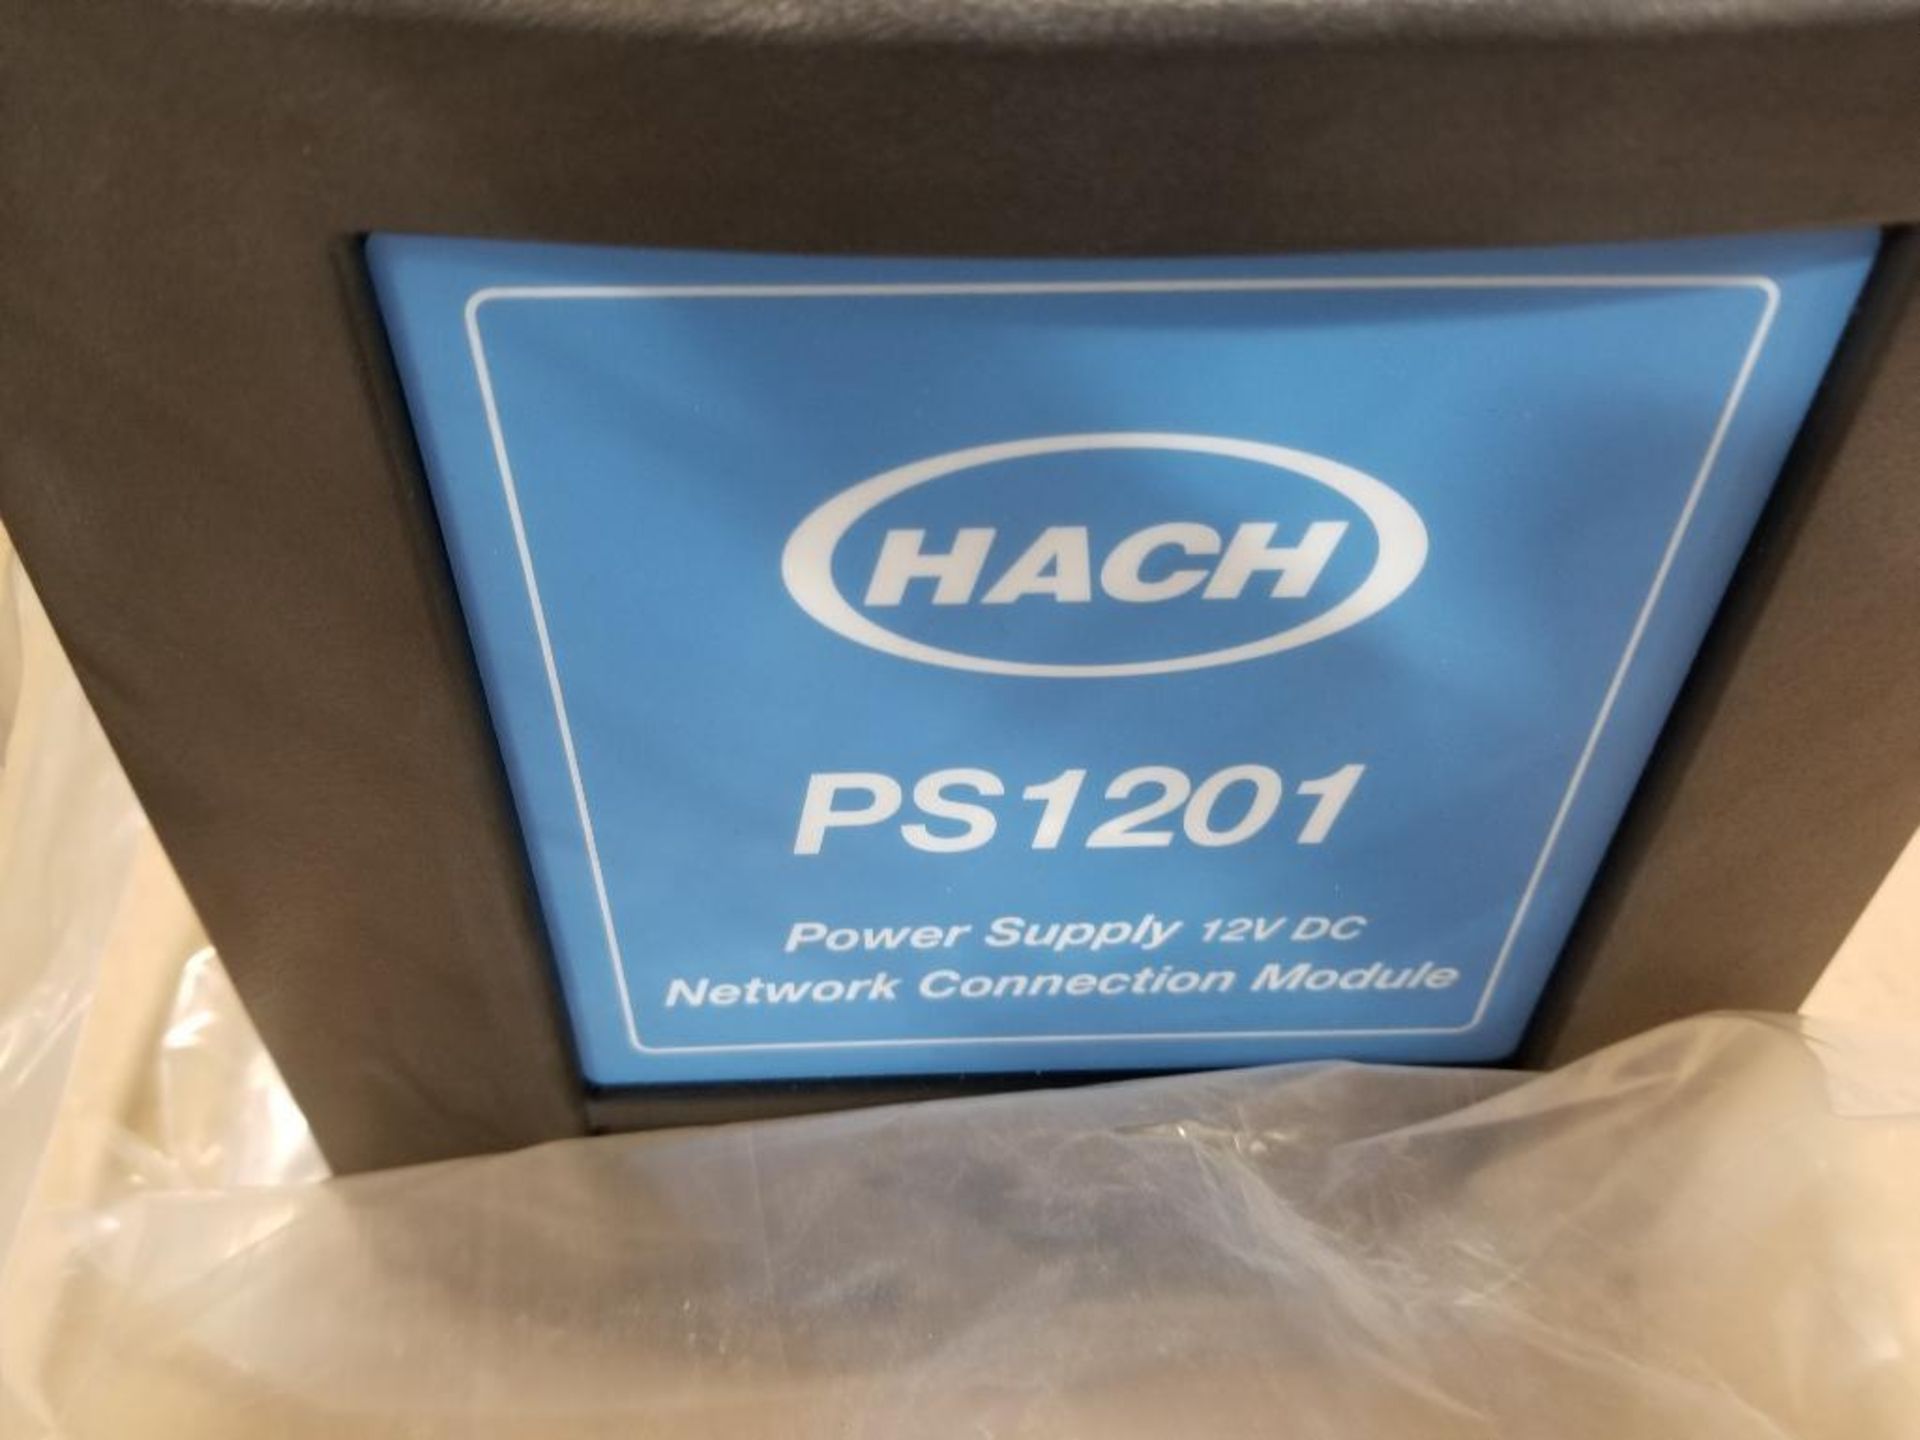 Hach power supply network connection module. Part number PS1201.